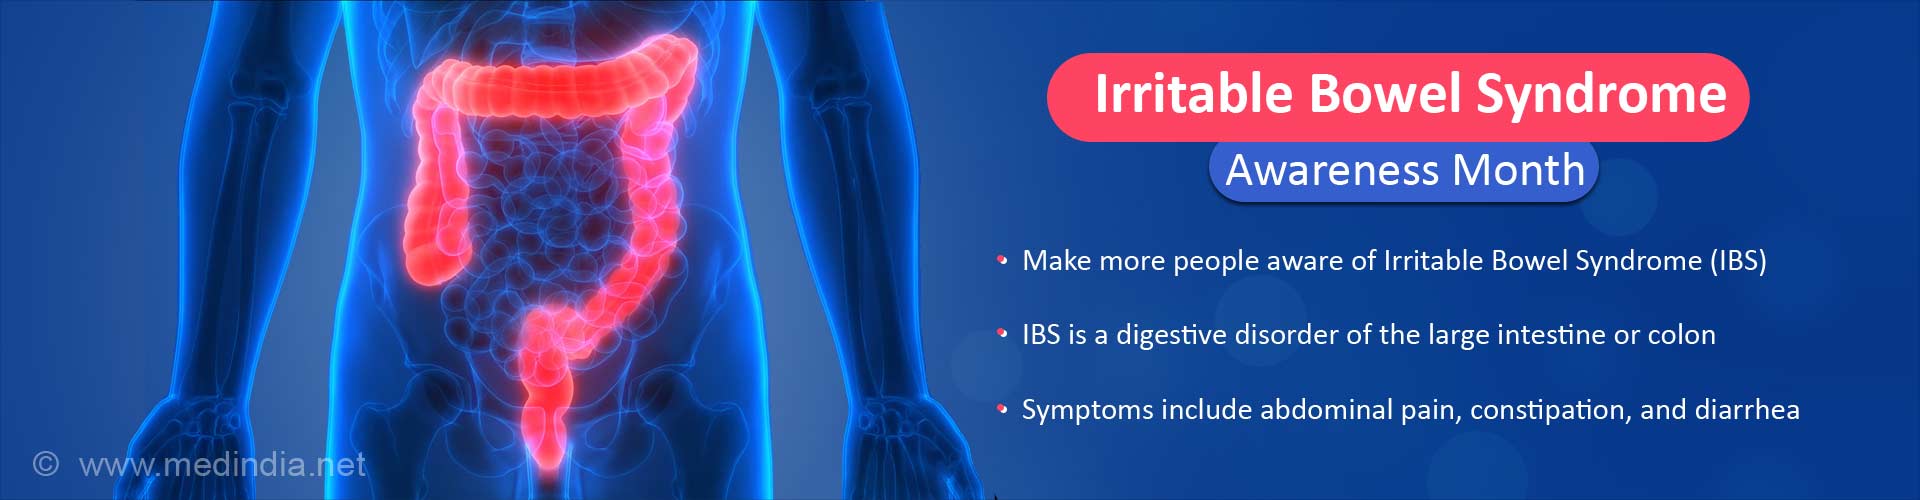 Irritable Bowel Syndrome - Awareness Month
- Make more people aware of Irritable Bowel Syndrome (IBS)
- IBS is a digestive disorder of the large intestine or colon
- symptoms include abdominal pain, constipation and diarrhea